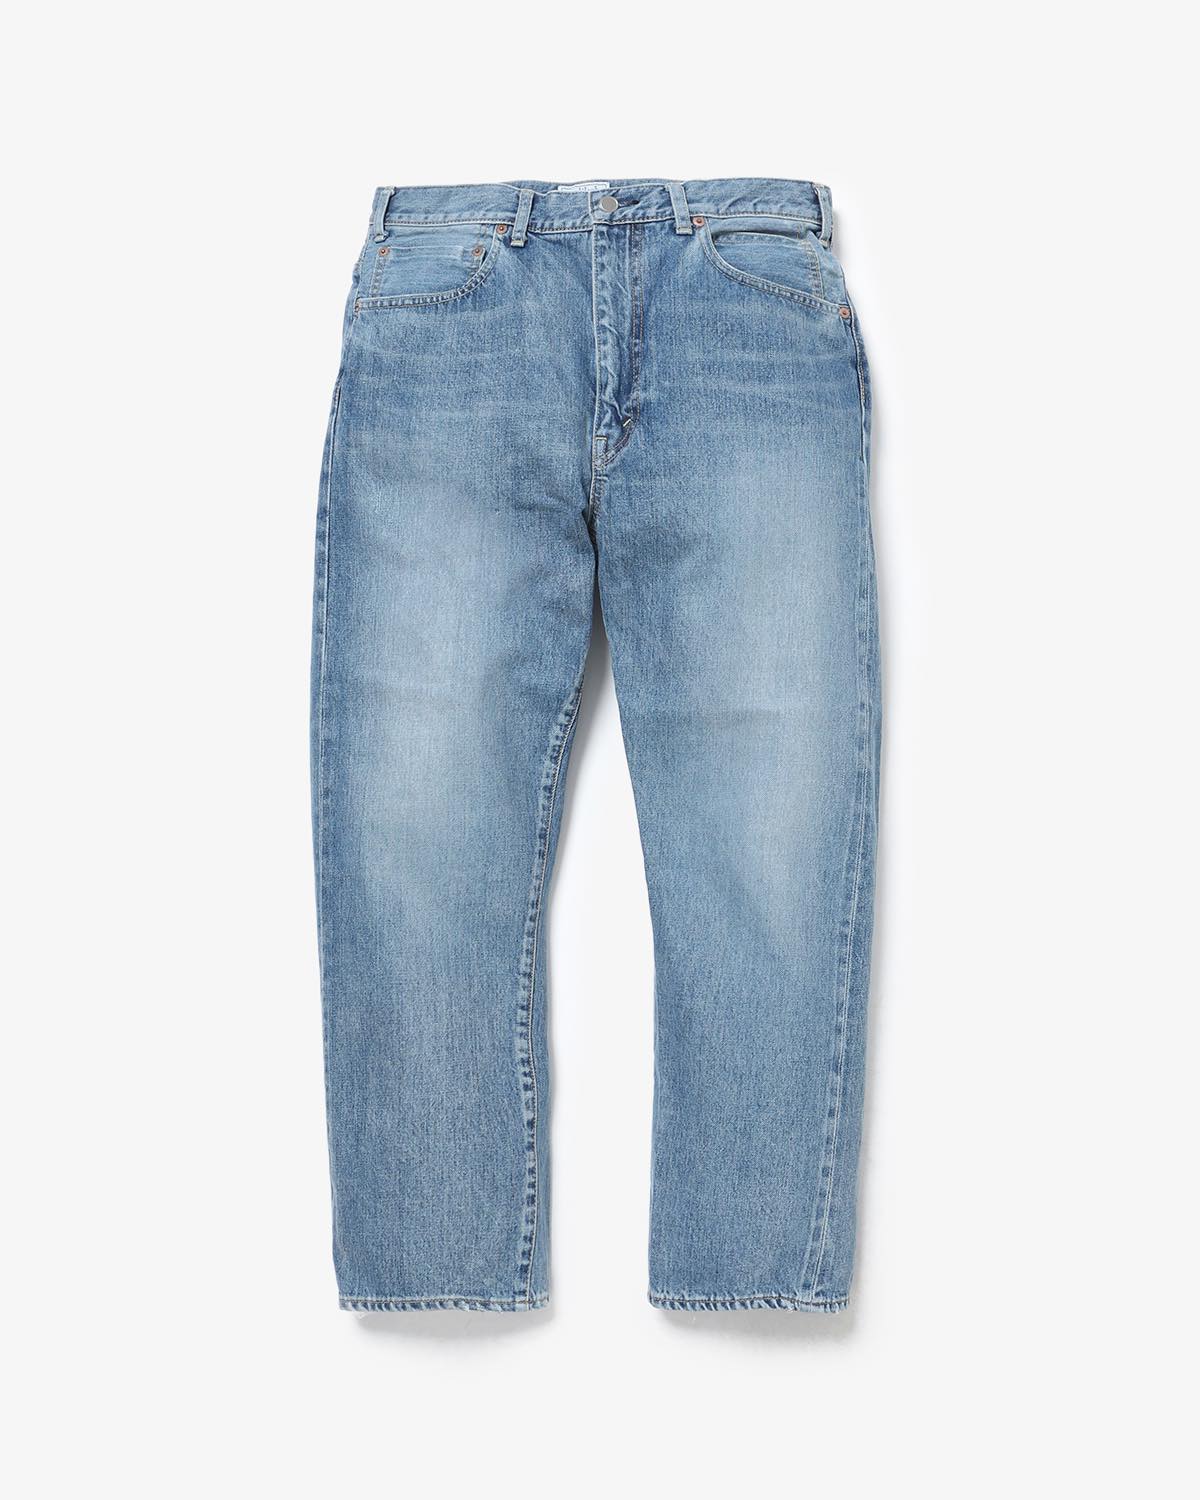 UNLIKELY TIME TRAVEL JEANS 1977 WASH